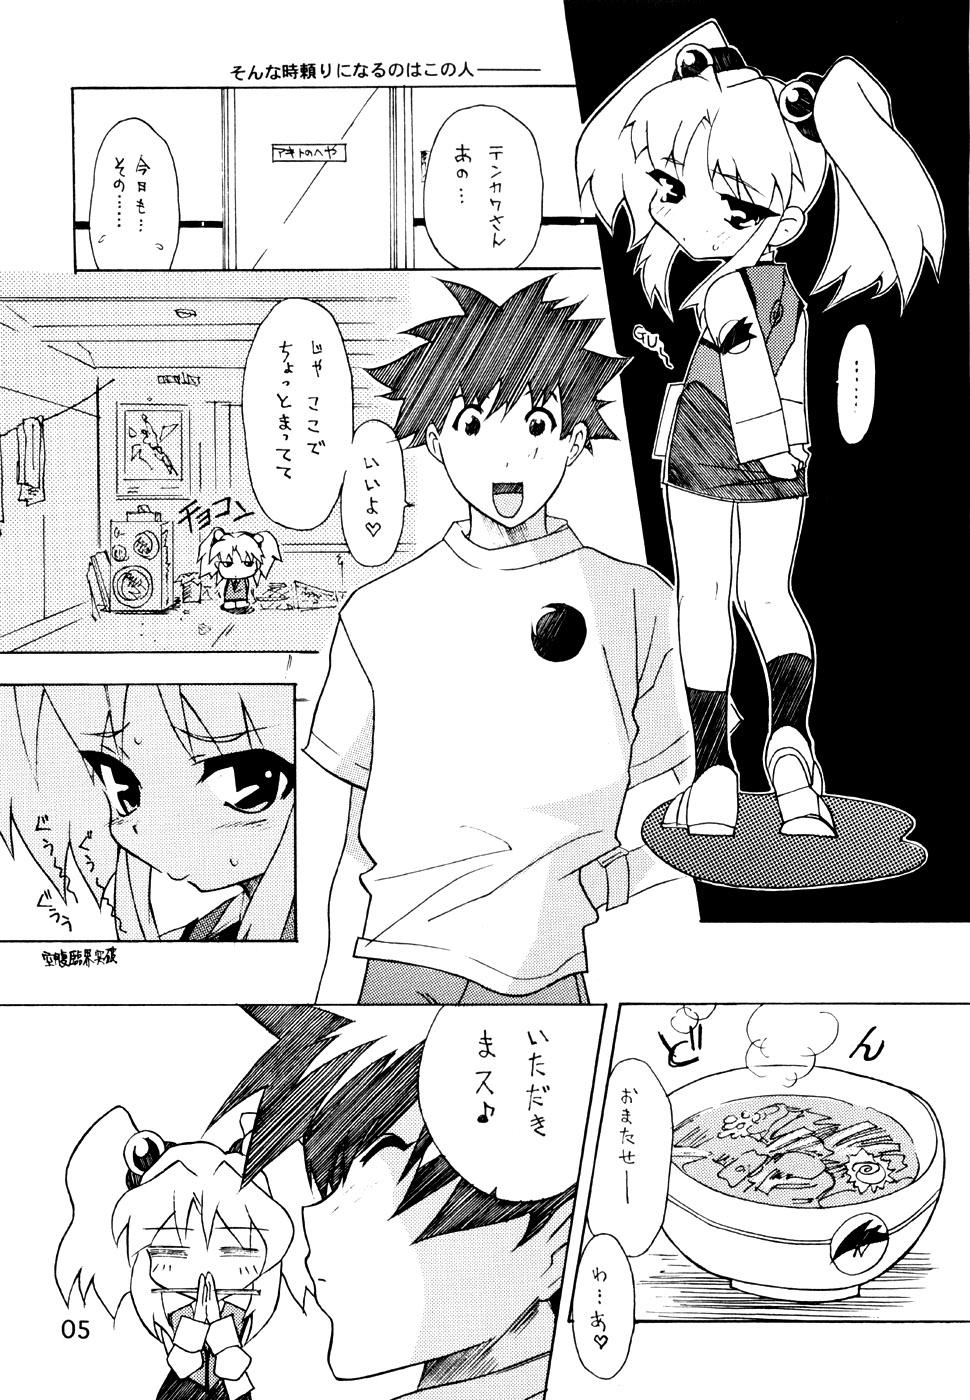 Point Of View RURI MOE 6 - Martian successor nadesico Blows - Page 4